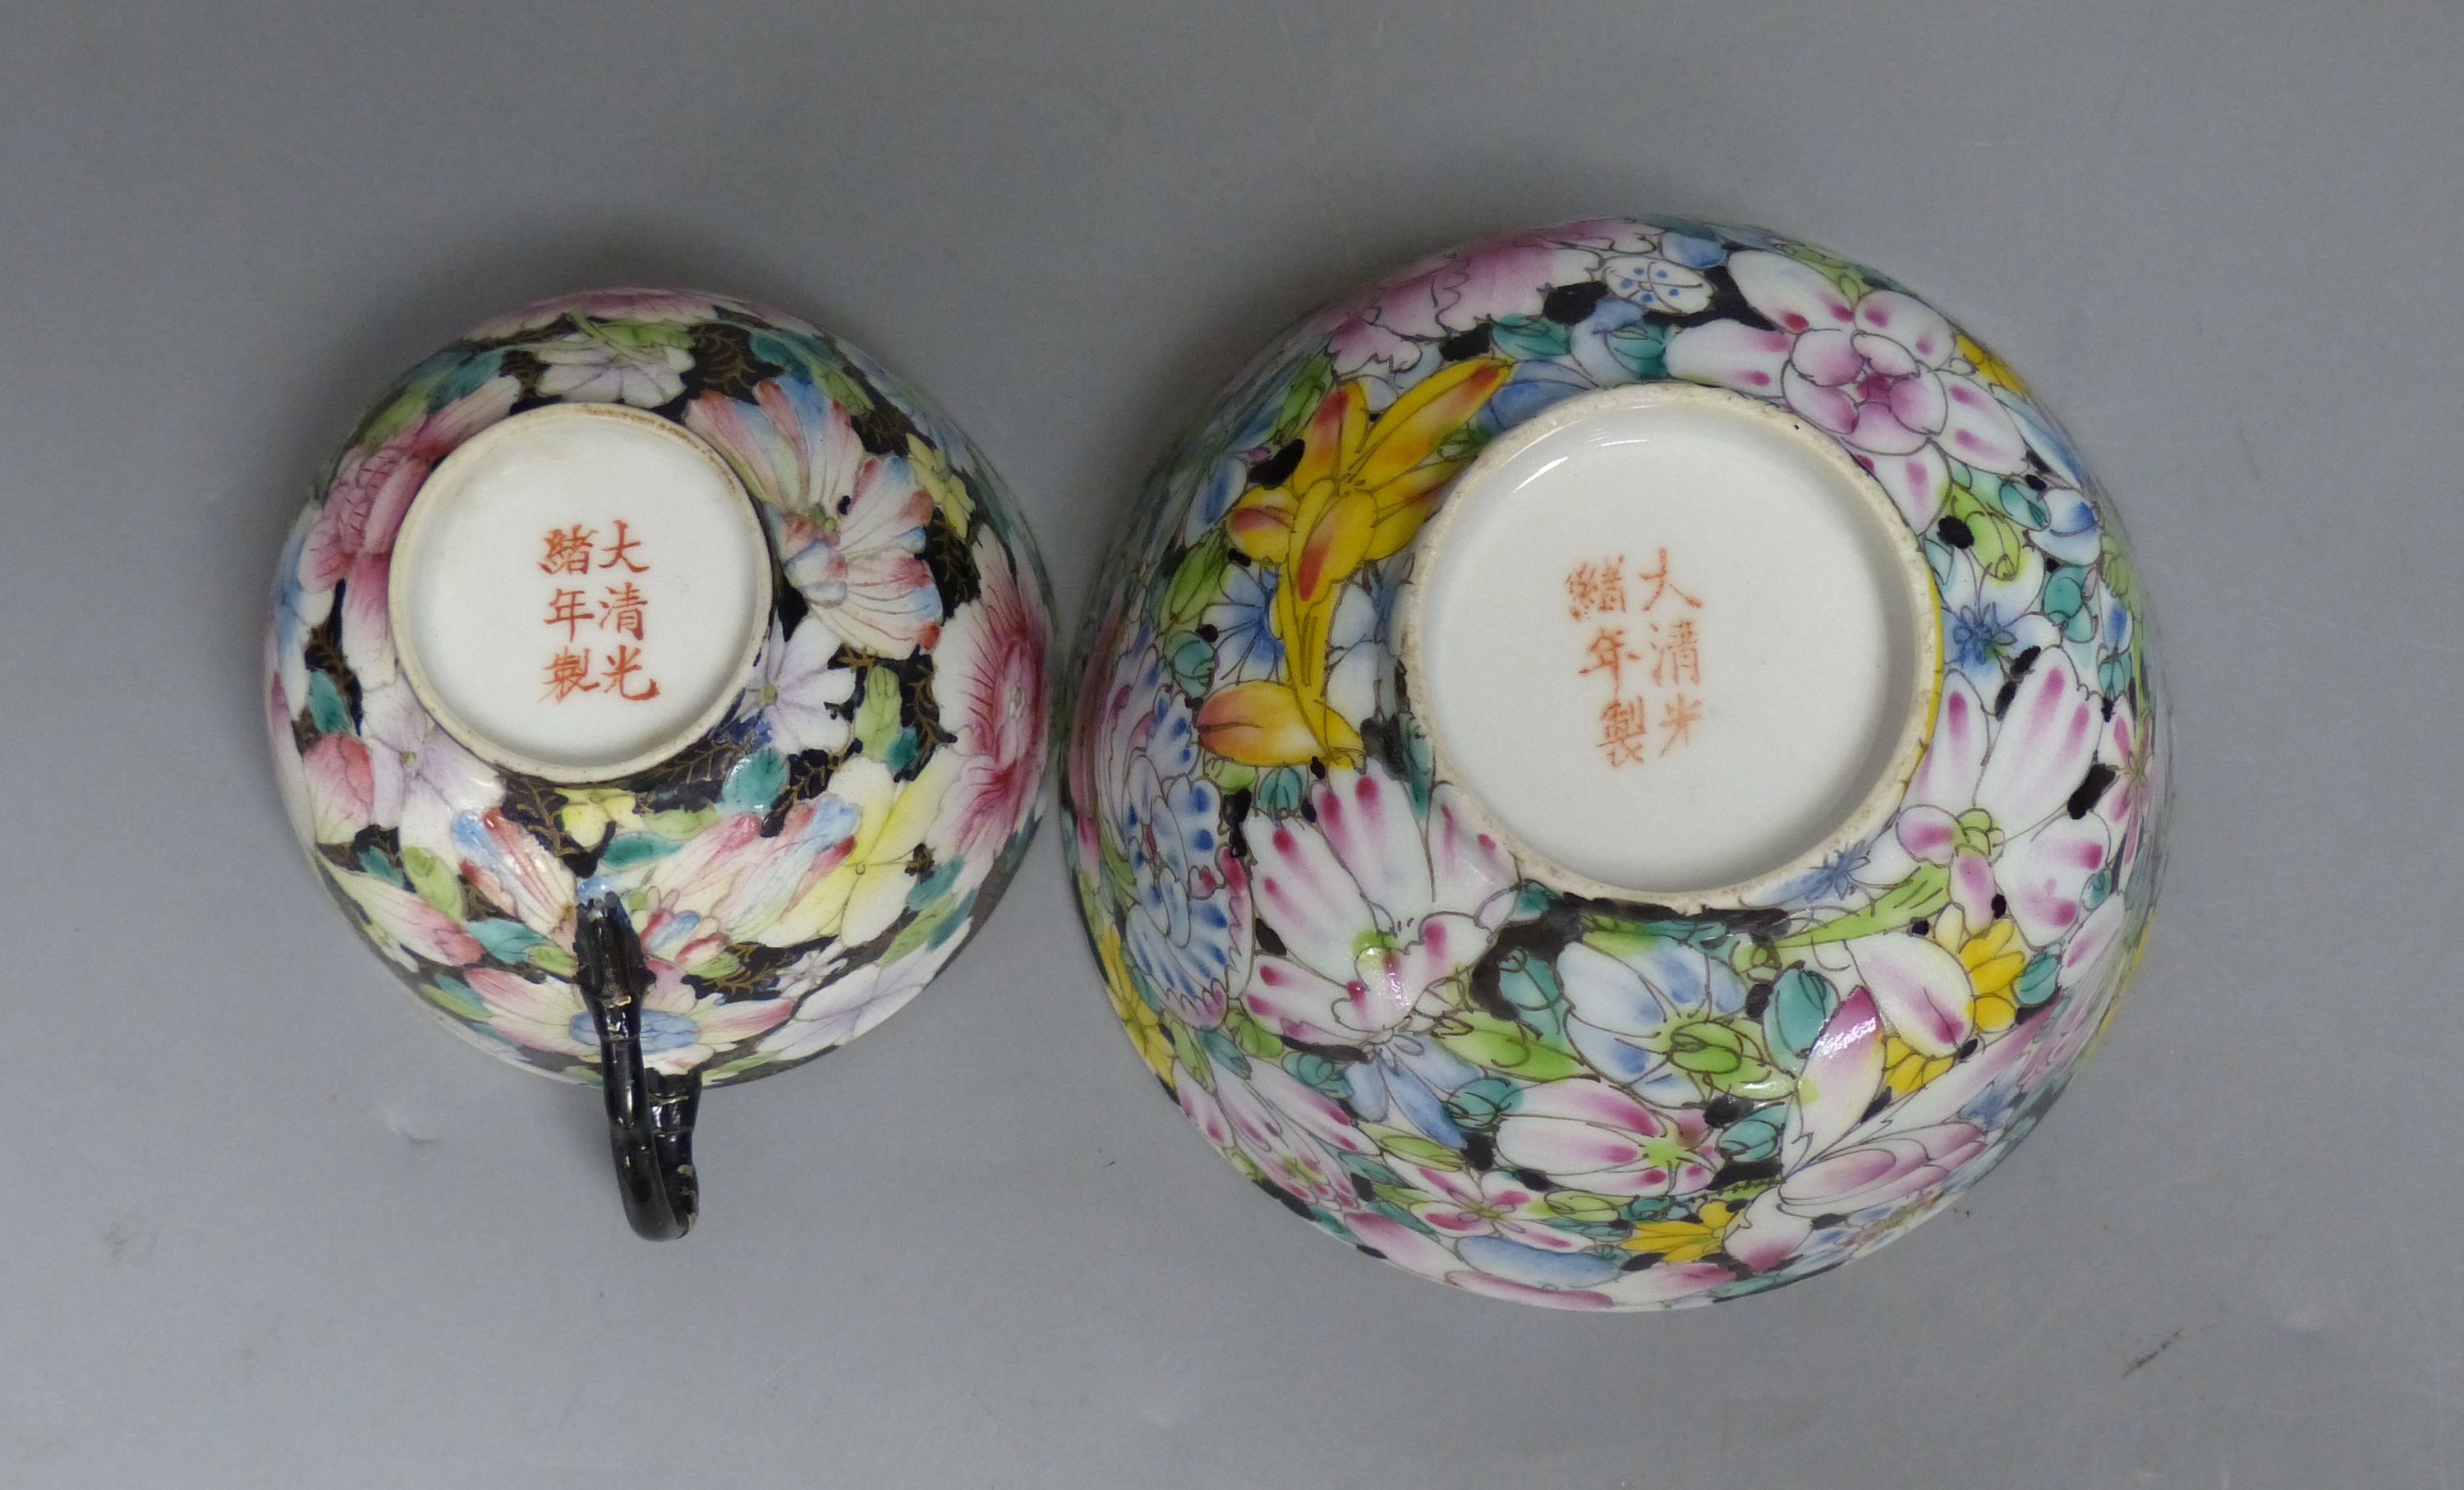 Five Chinese Millefleur cups and a bowl, Guangxu marks, early 20th century, diameter 12cm - Image 4 of 4